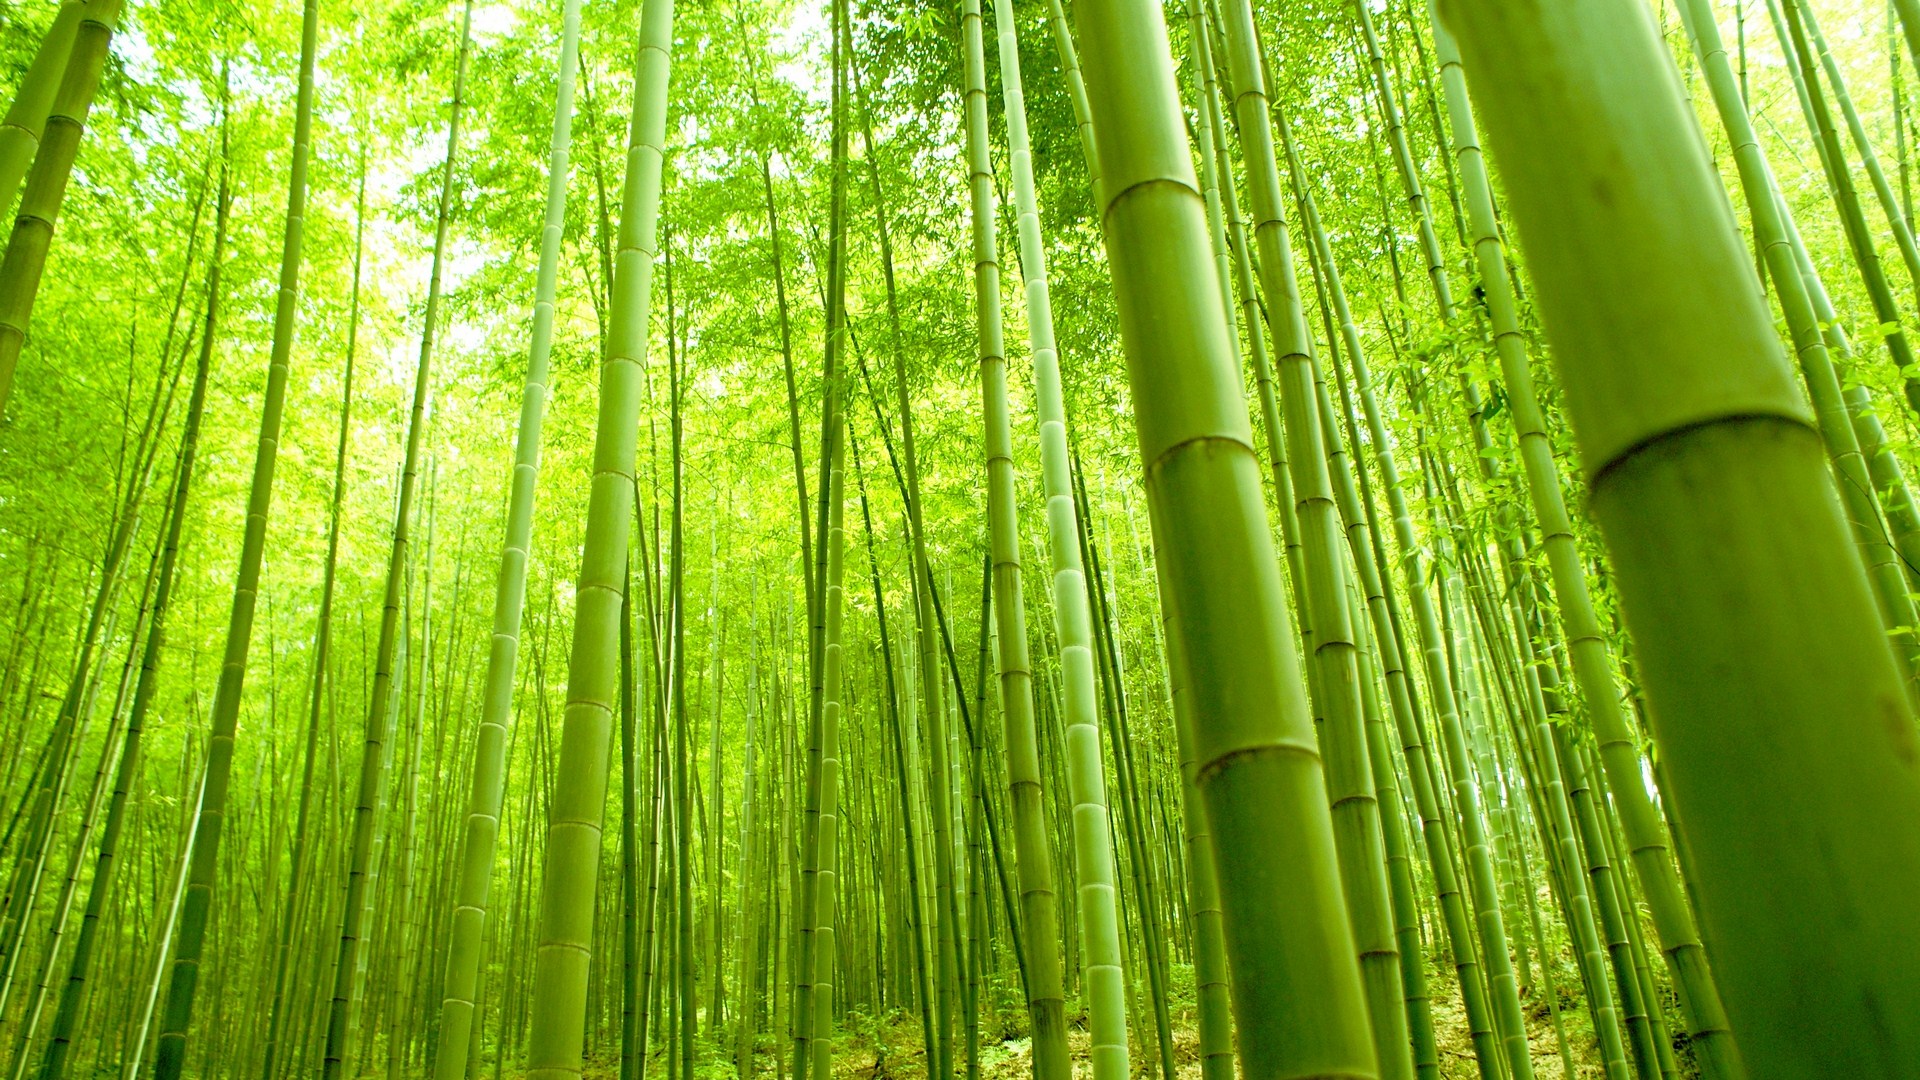 Bamboo Forest image